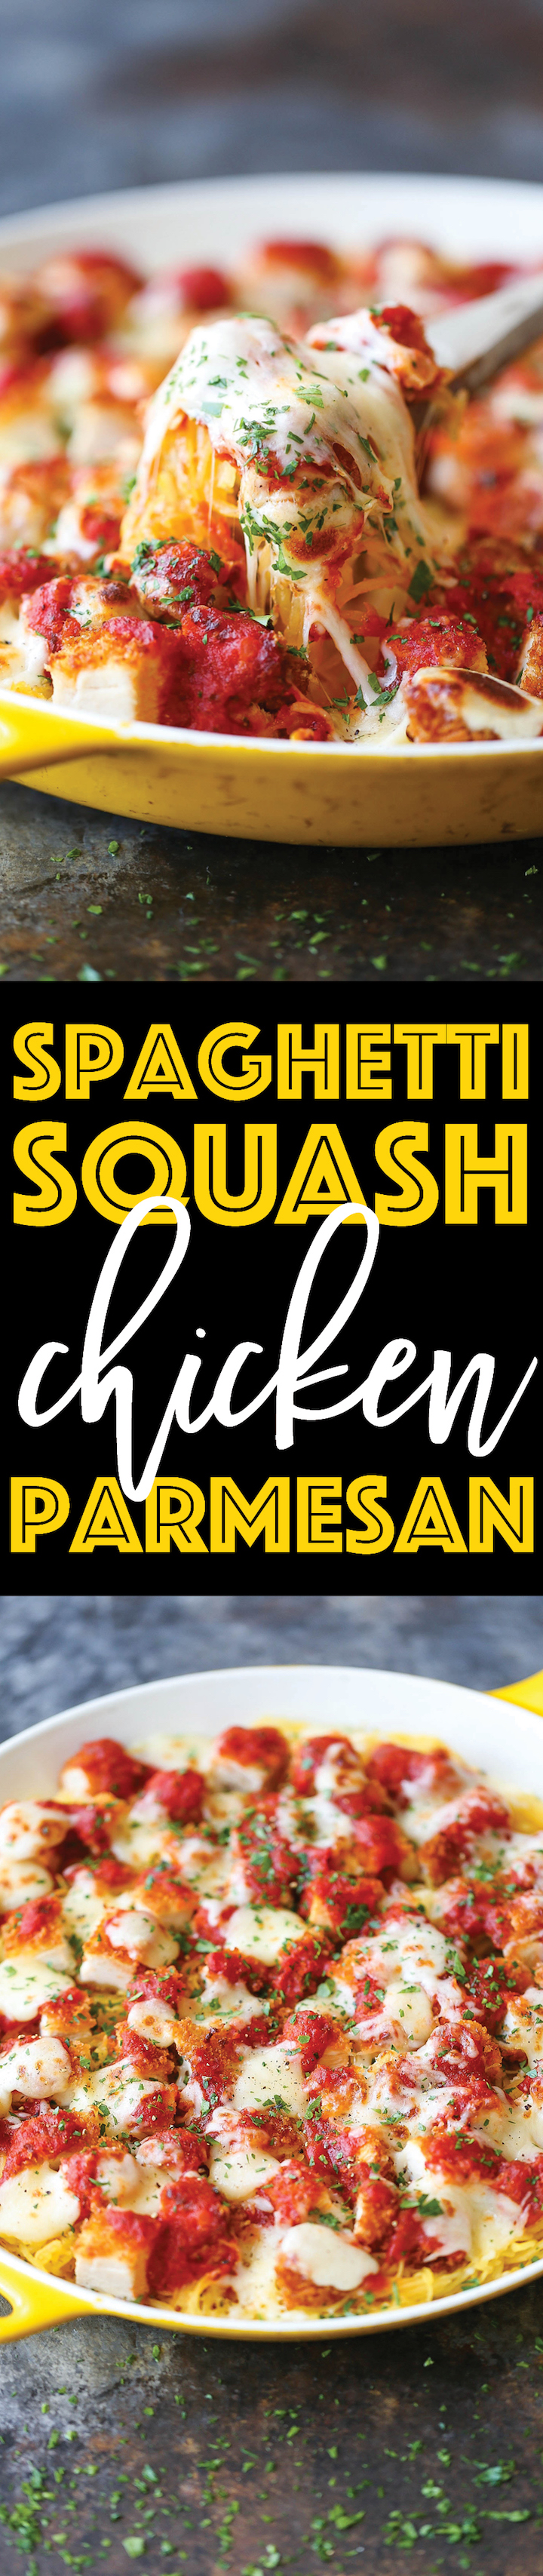 Spaghetti Squash Chicken Parmesan - An amazingly healthier version of everyone's favorite chicken parm without compromising taste. The best comfort food!